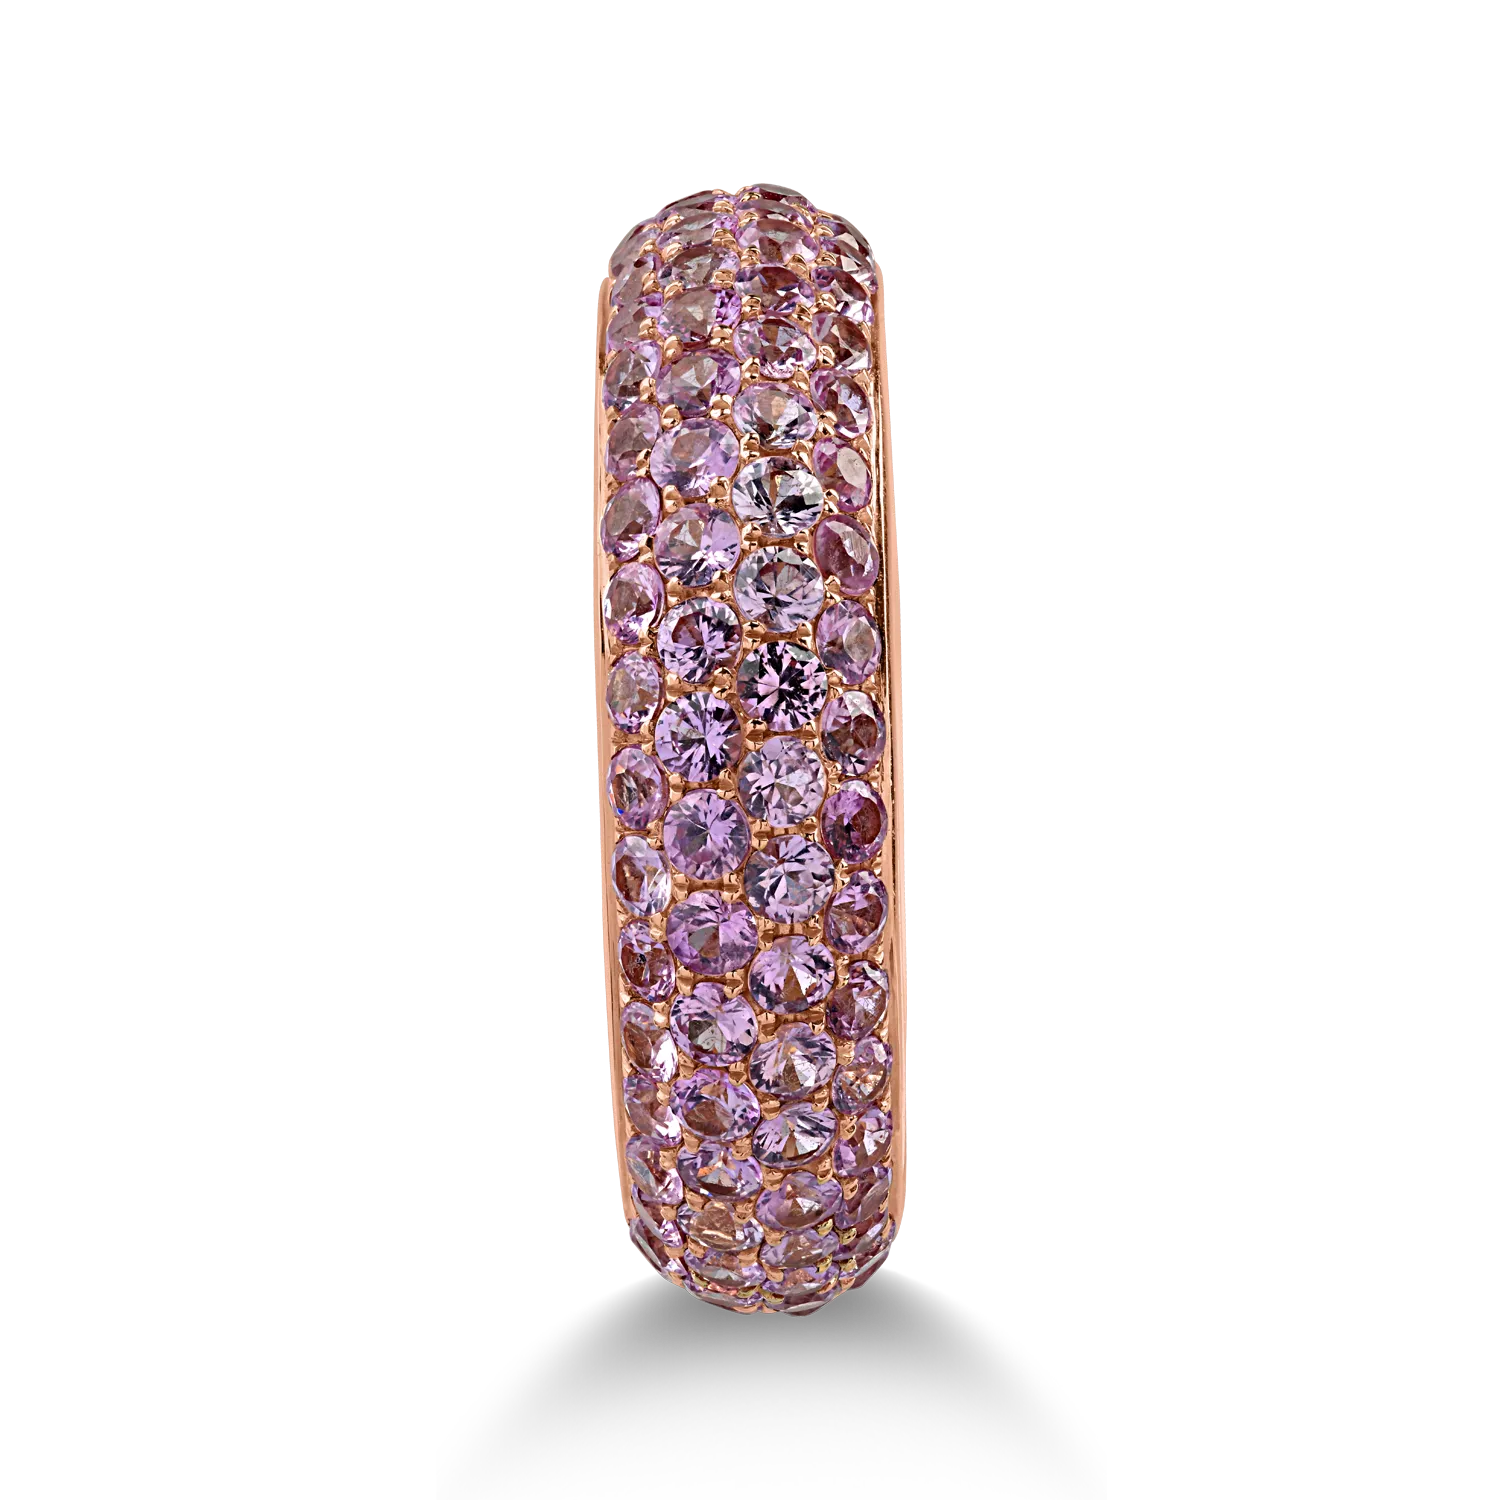 Half eternity ring in rose gold with 1.81ct light pink sapphires